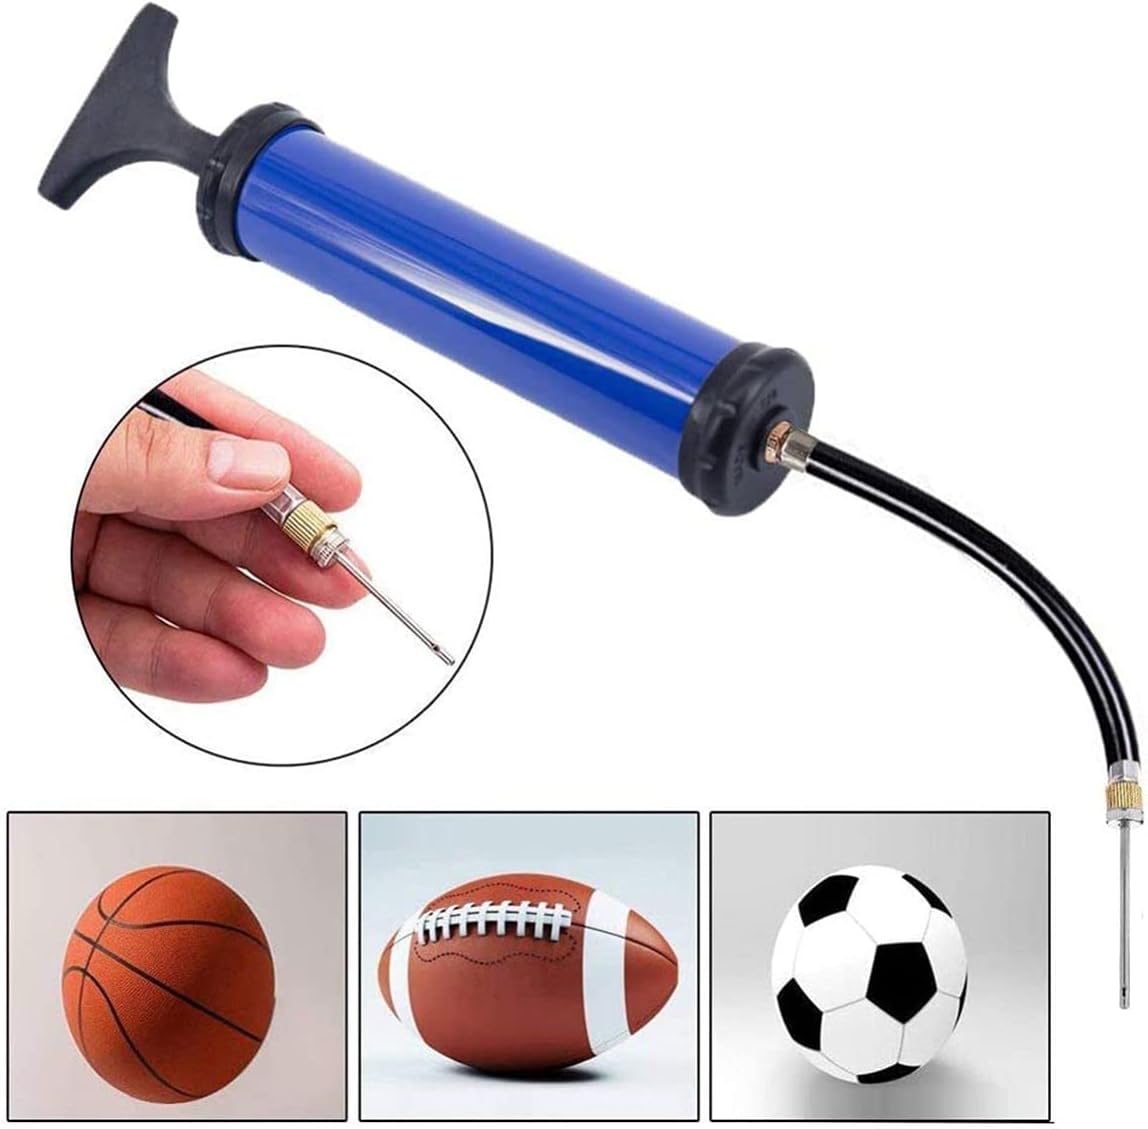 Needles to inflate double port, (football, basketball, volleyball, rugby)
Pack of 12